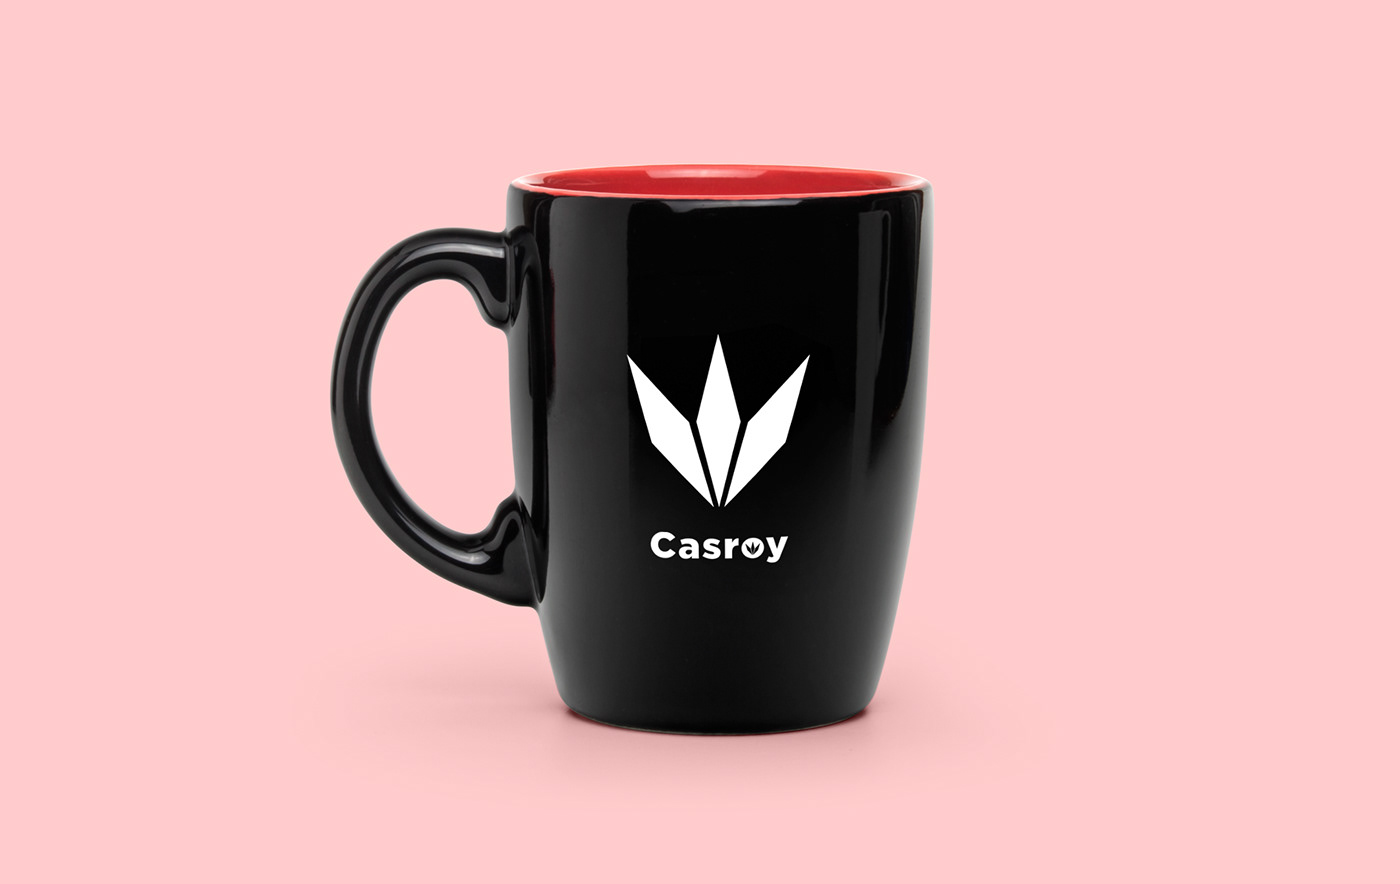 Image contains: Casroy branding on a cup/mug designed by Humza DZN.
